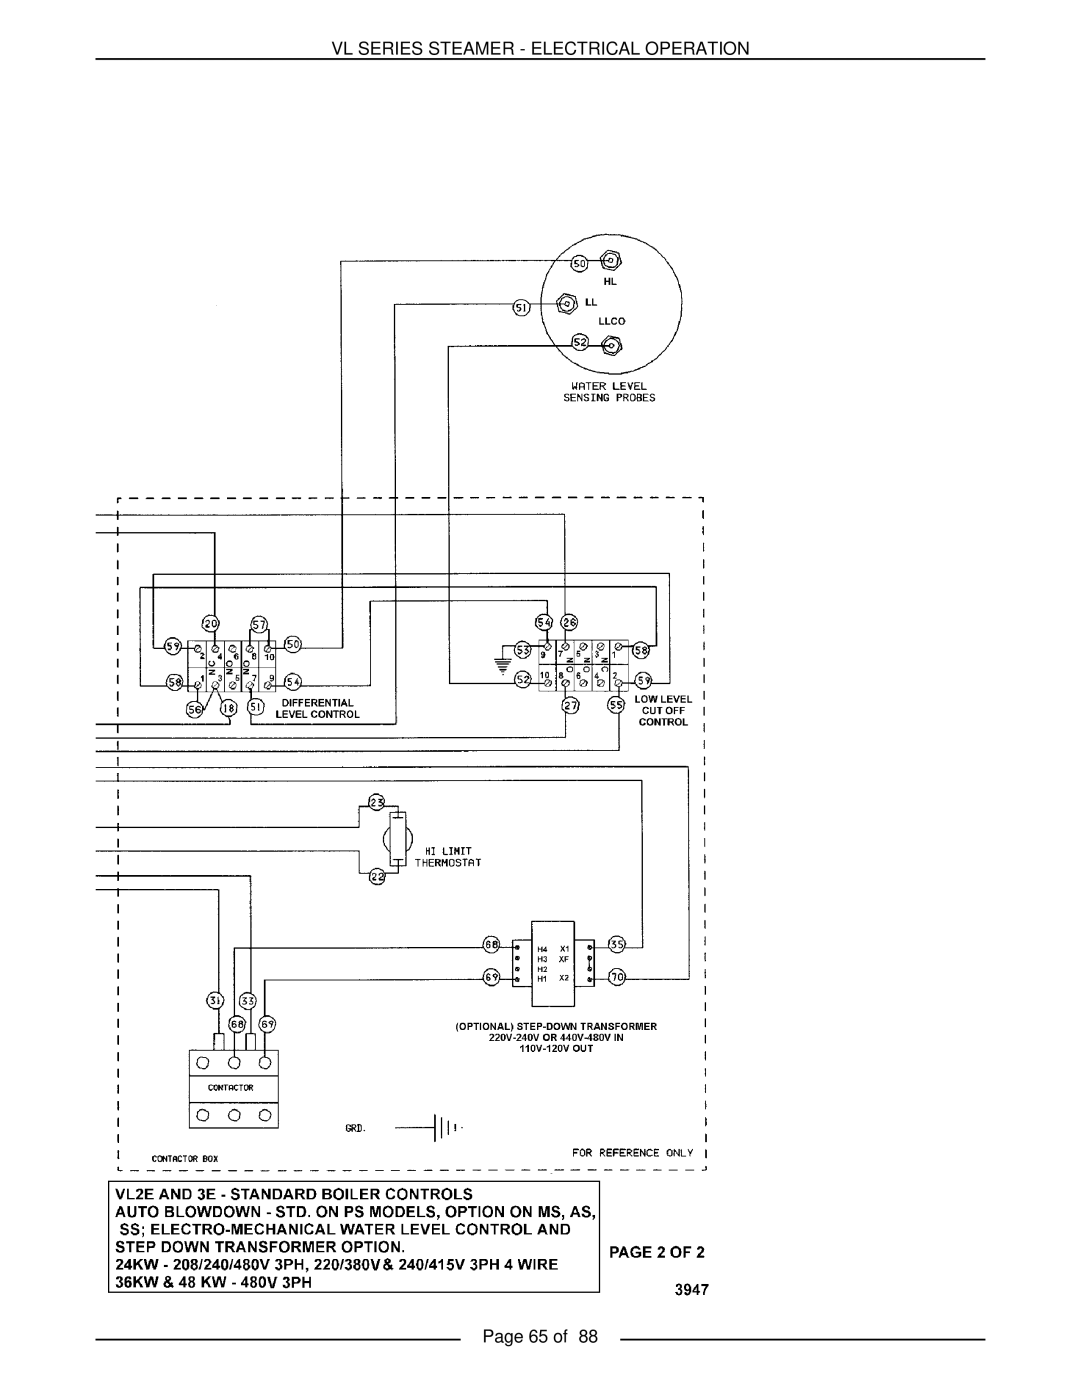 Vulcan-Hart VL2GMS, VL3GMS, VL3GAS, VL2GAS, VL2GSS, VL3GSS, VL3GPS, VL2GPS Vl Series Steamer - Electrical Operation, Page 65 of 